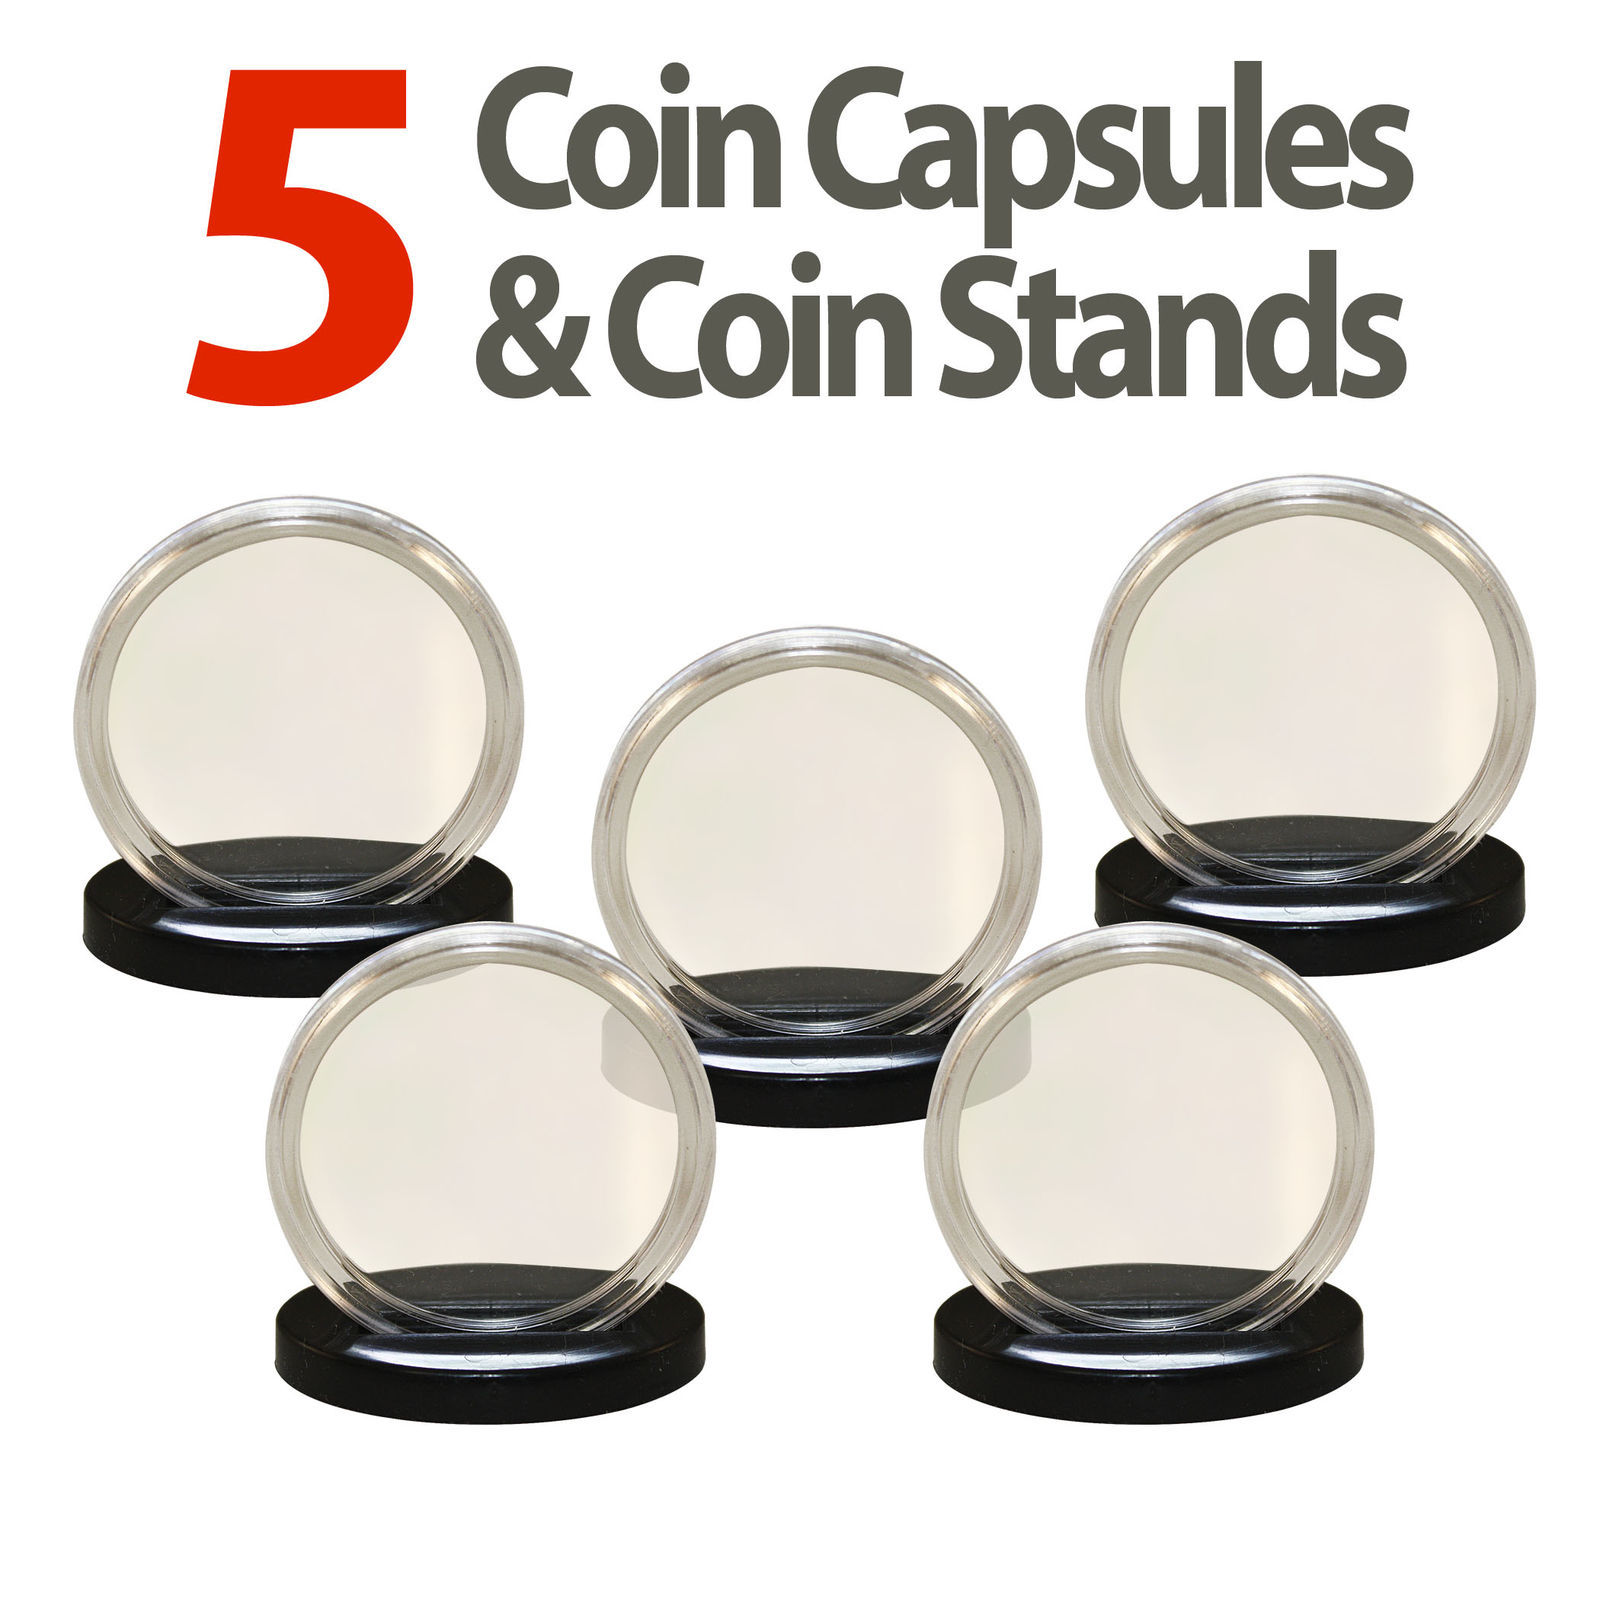 5 Coin Capsule & 5 Coin Stands for PENNIES Direct Fit Airtight 19mm Coin Holders - $8.56